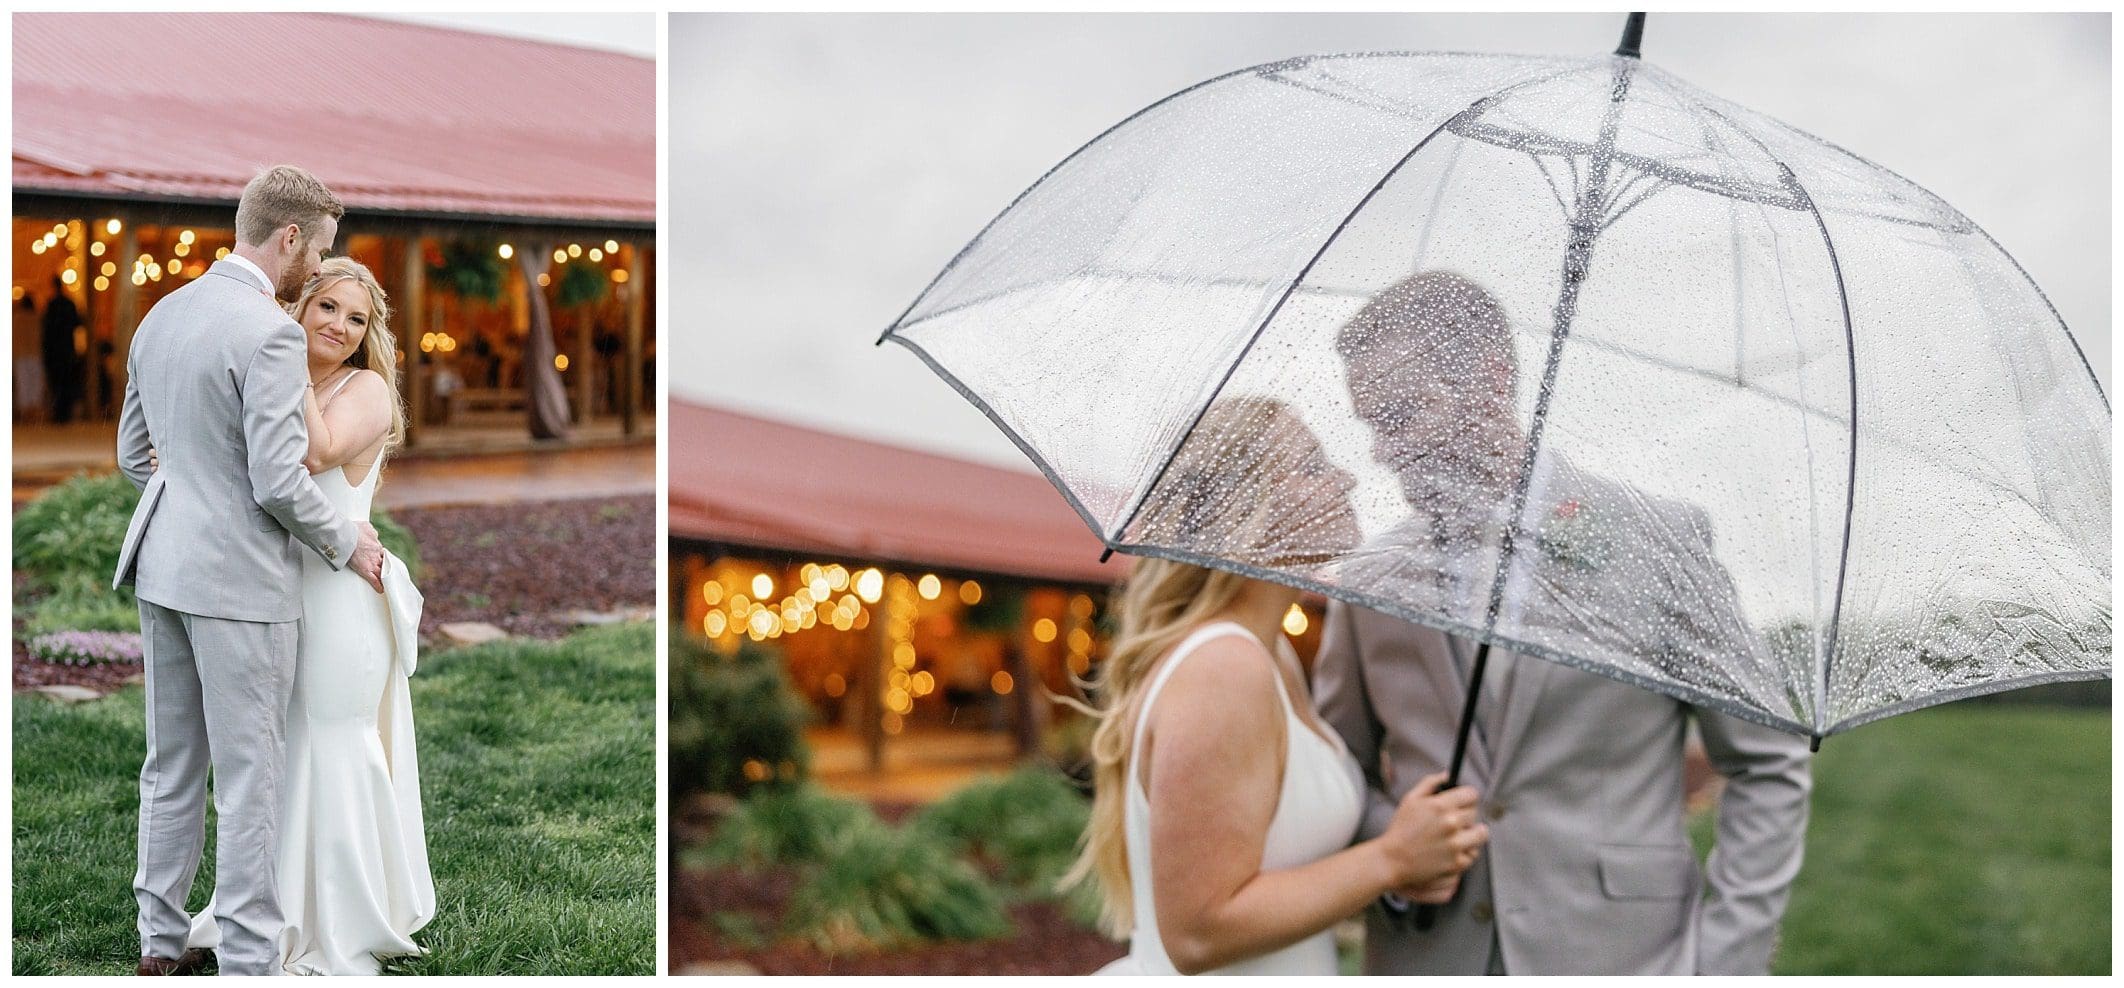 Bride and groom in the rain at their wedding